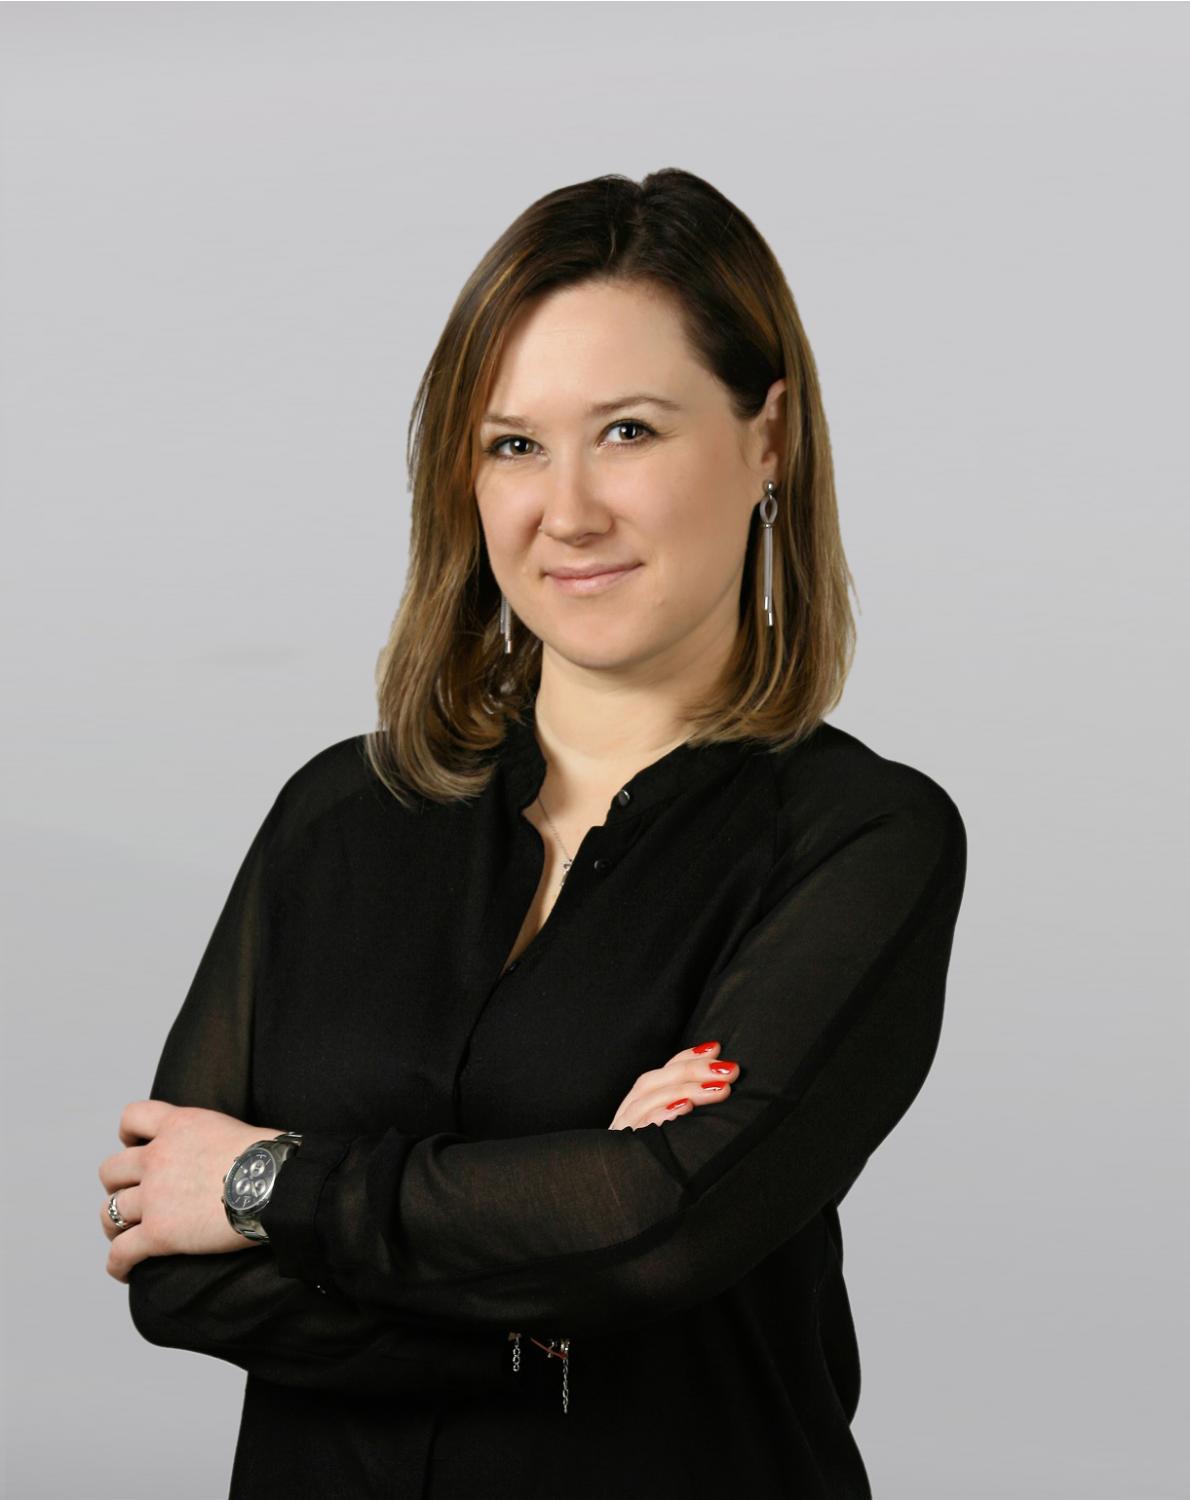 Izabela Bednarz, Member of managment board Taxes Poland, BPG Consulting Wroclaw, Tax Advisory